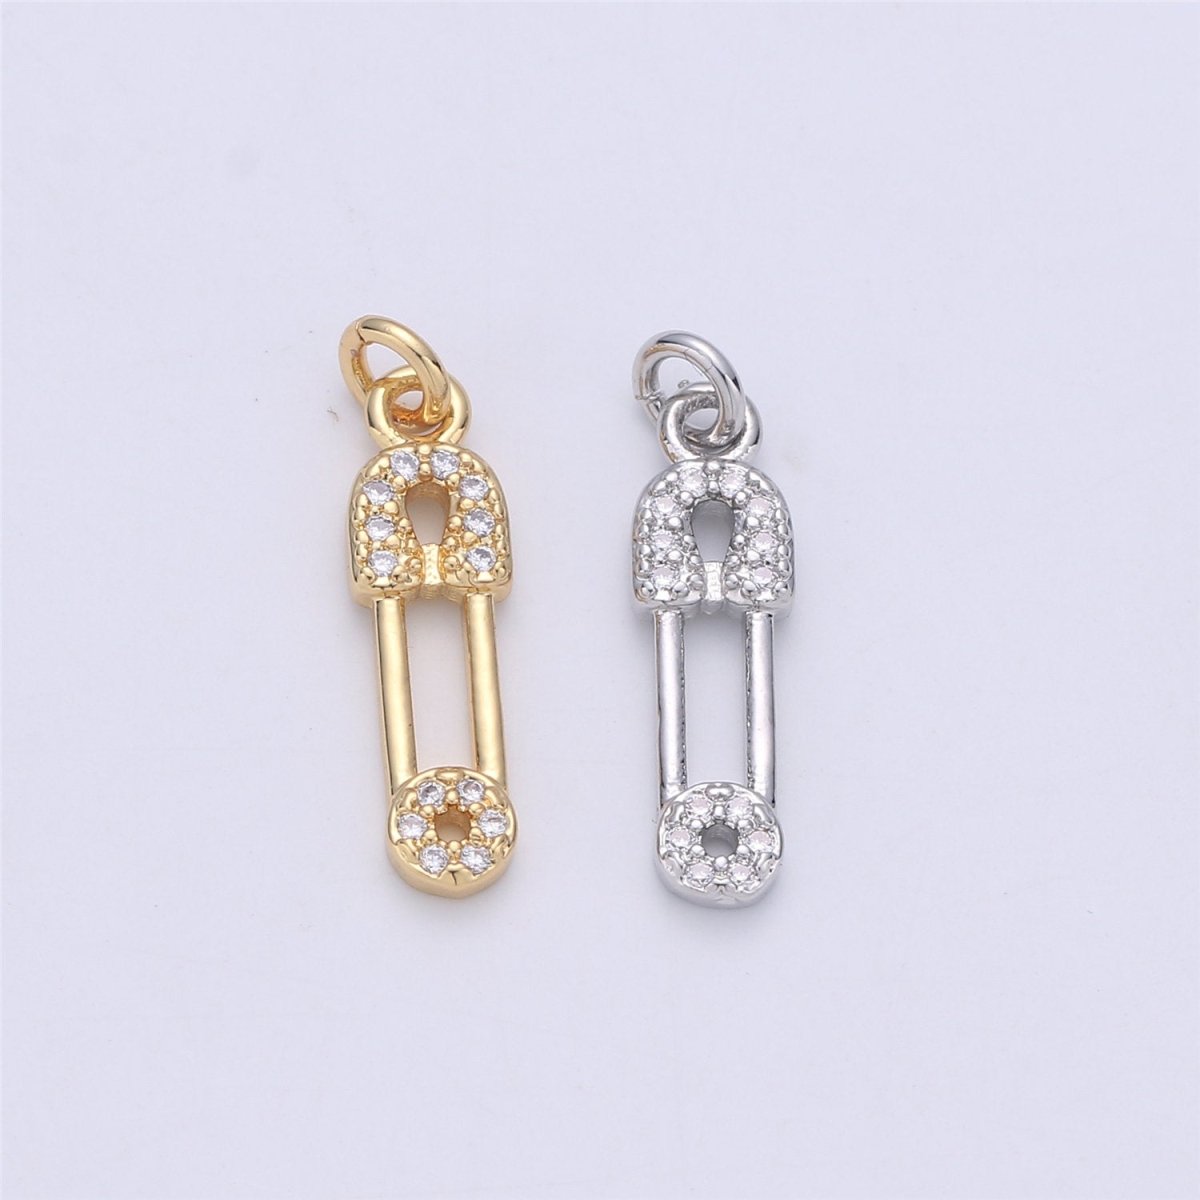 Micro Pave Gold Safety pin charm 1 piece, 20x5mm 14k gold plated brass, Nickel free, Cubic zirconia, Dainty charm C-922 - DLUXCA